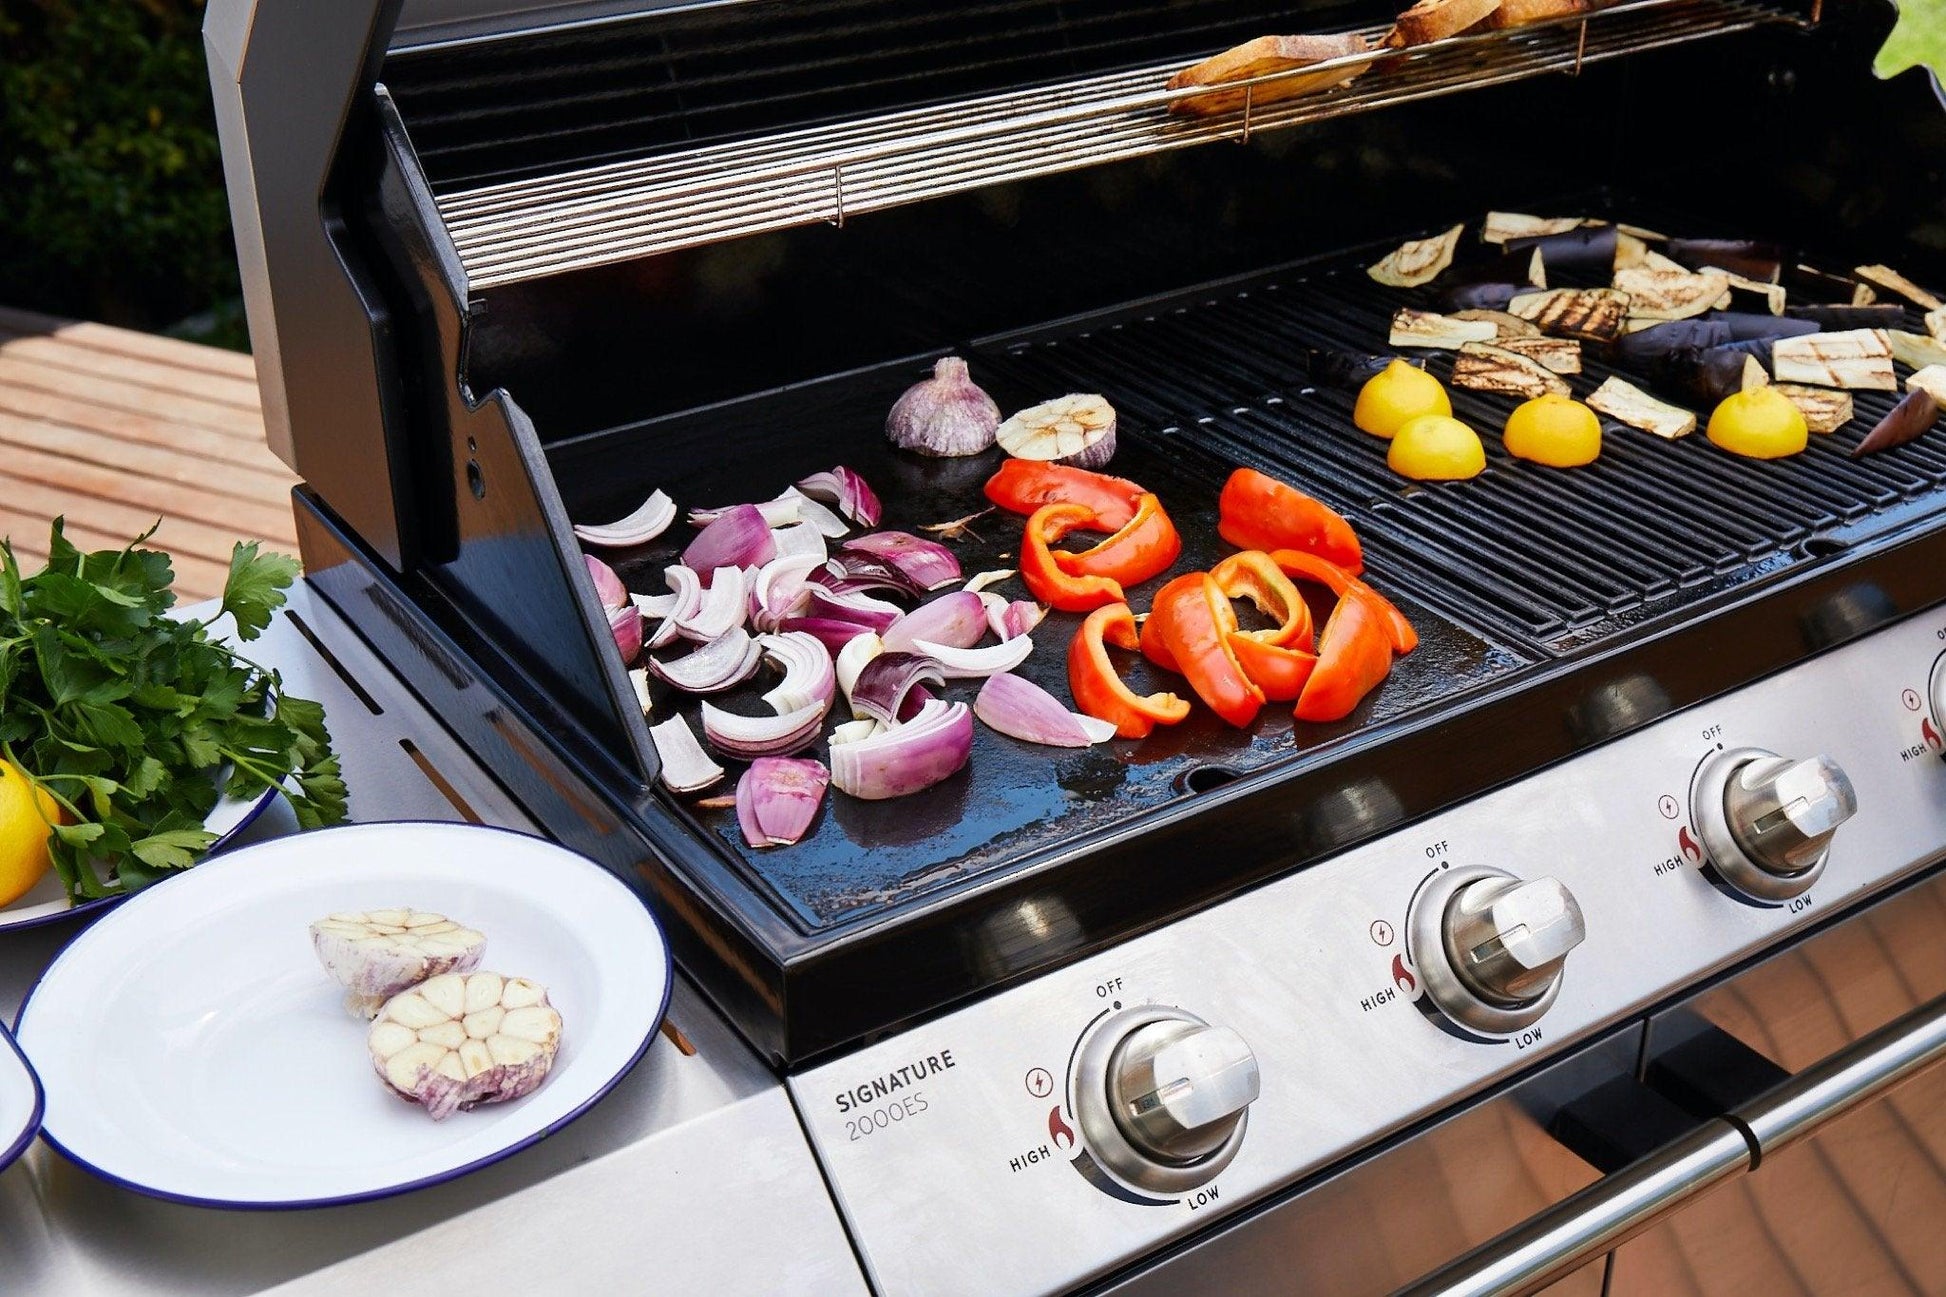 A Brisks BeefEater 1200E Series 5 Burner BBQ & Trolley with assorted vegetables cooking on it, including red onions, bell peppers, garlic, and yellow tomatoes. More vegetables await on a nearby plate and fresh herbs rest on a wooden surface, enhancing the outdoor living experience of this 5 Burner BBQ setup.